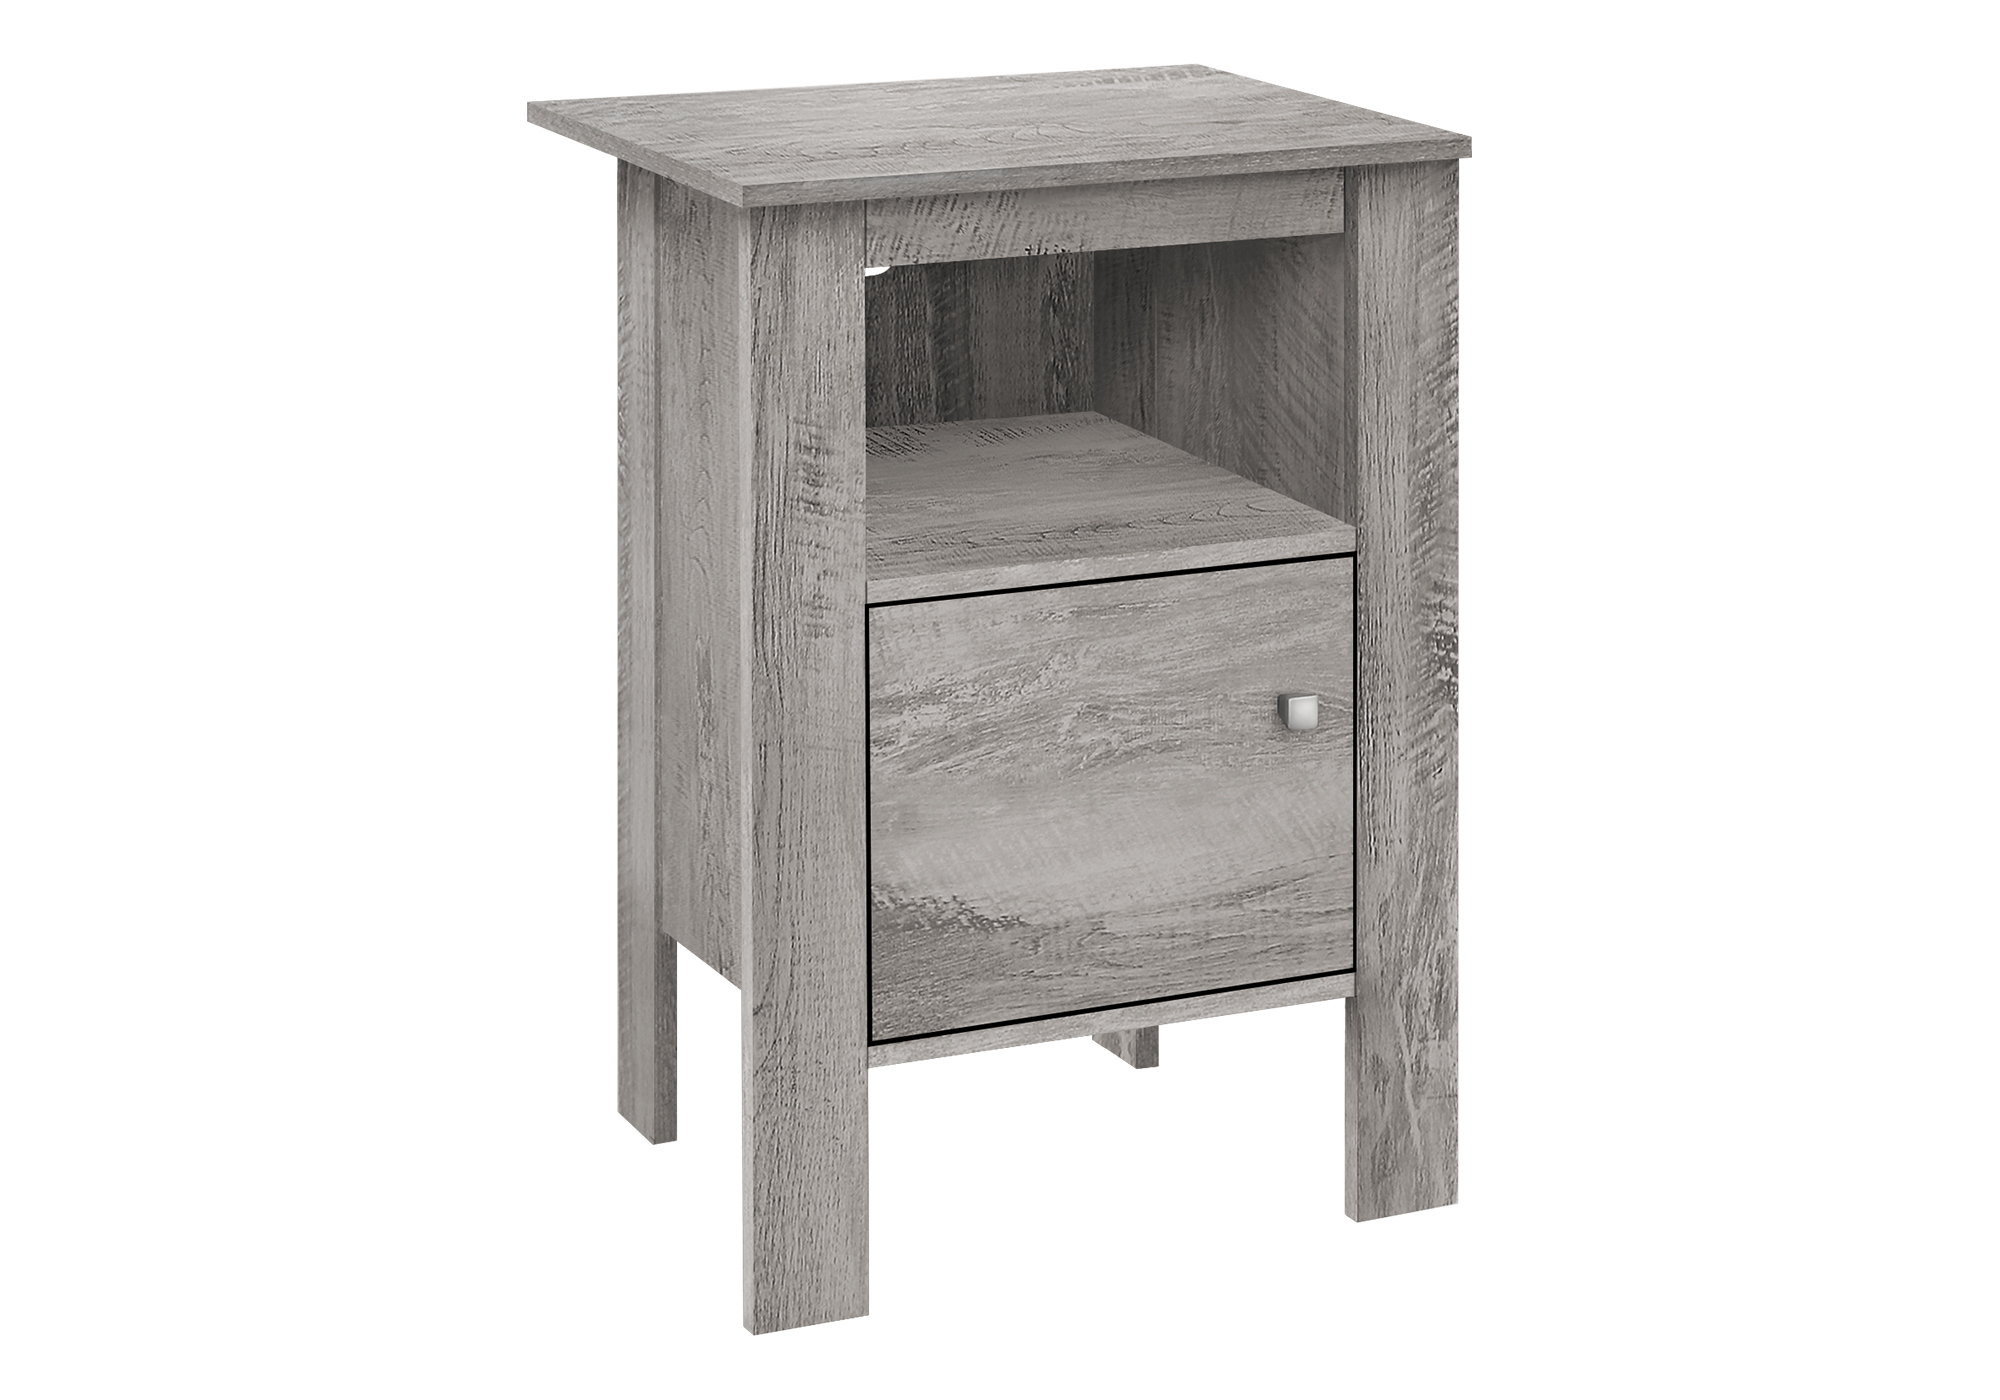 ACCENT TABLE - INDUSTRIAL GREY NIGHT STAND WITH STORAGE